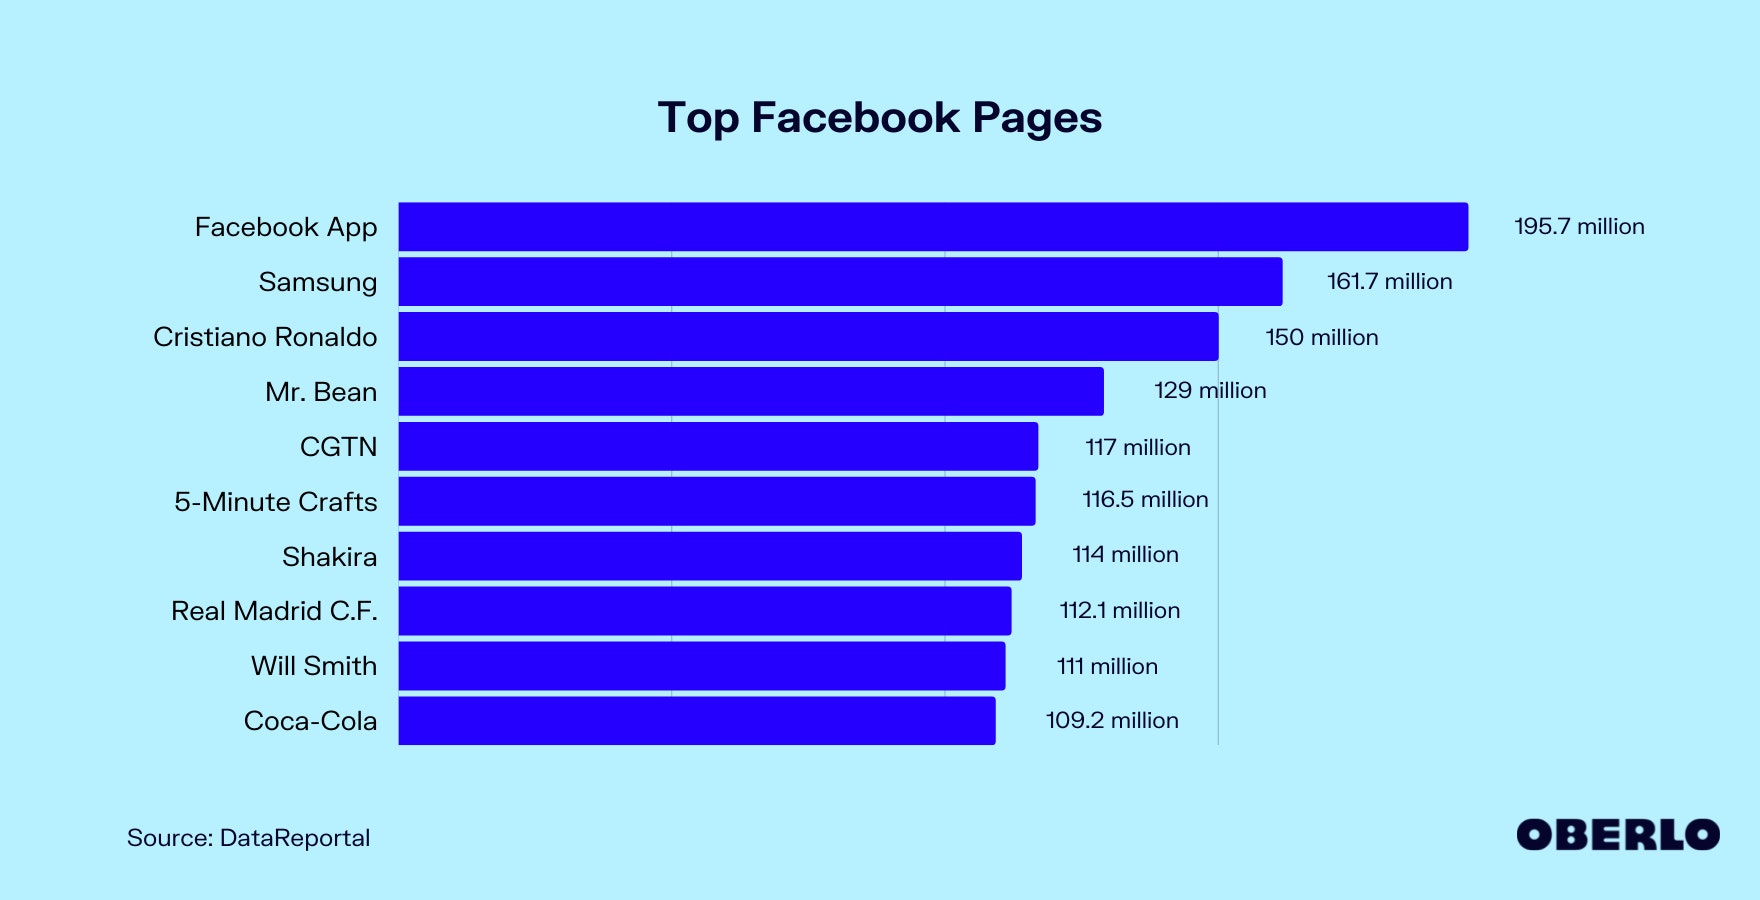 Chart of the Top Facebook Pages